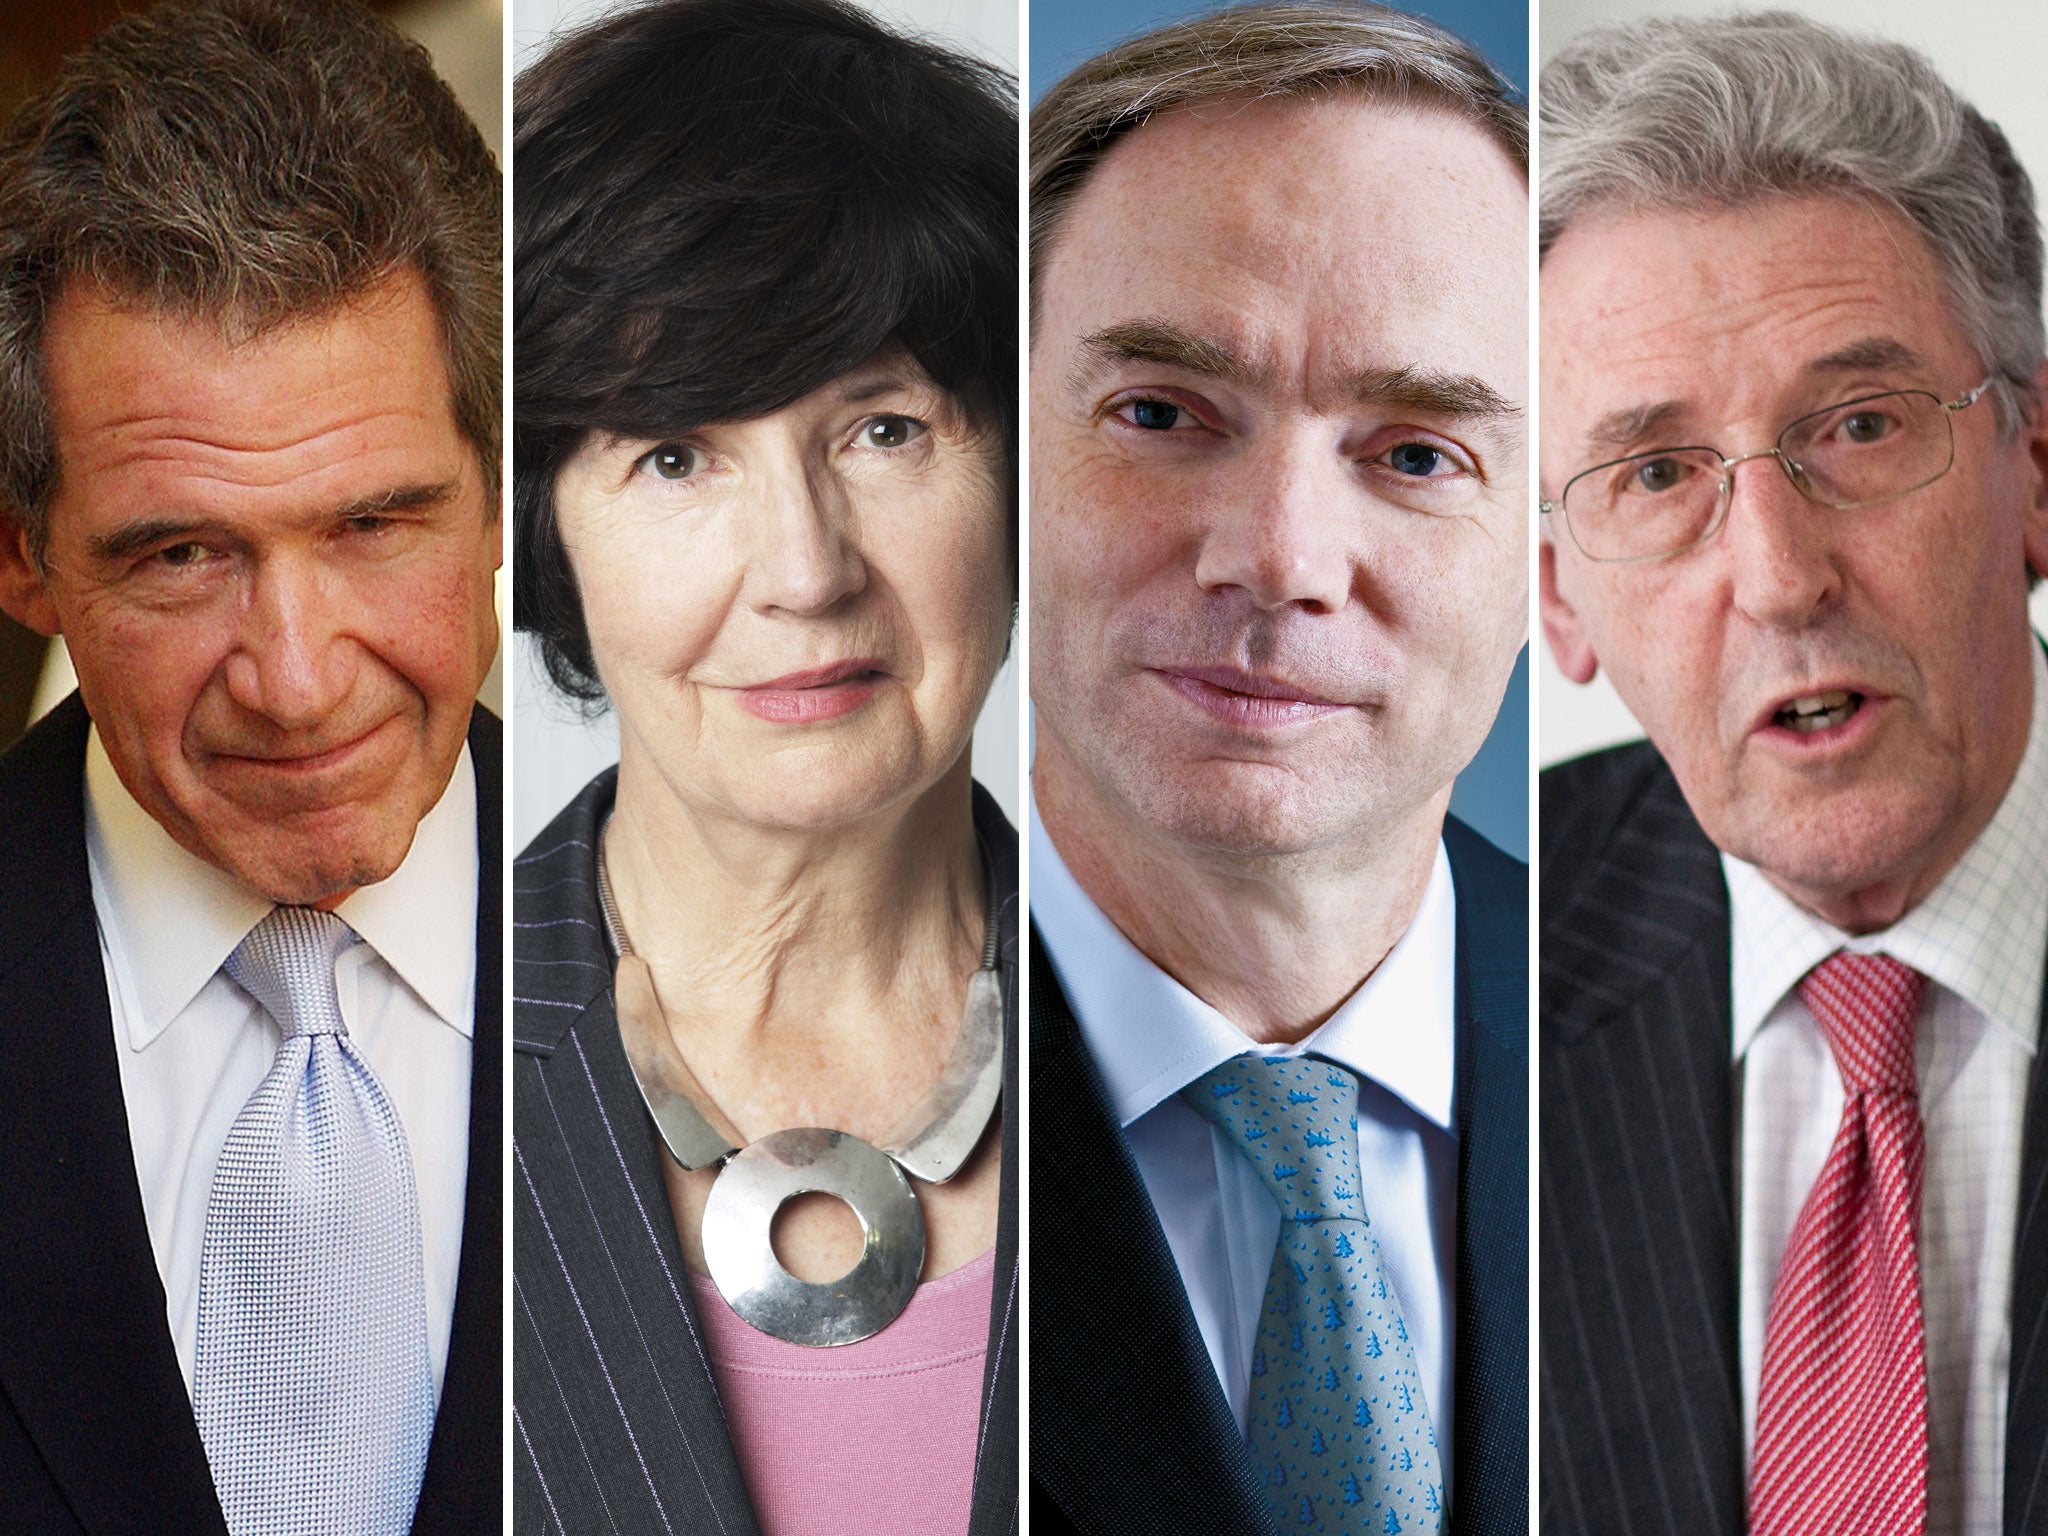 Industry figures Lord Browne, Baroness Hogg, Sam Laidlaw, and Lord Howell all advise the government